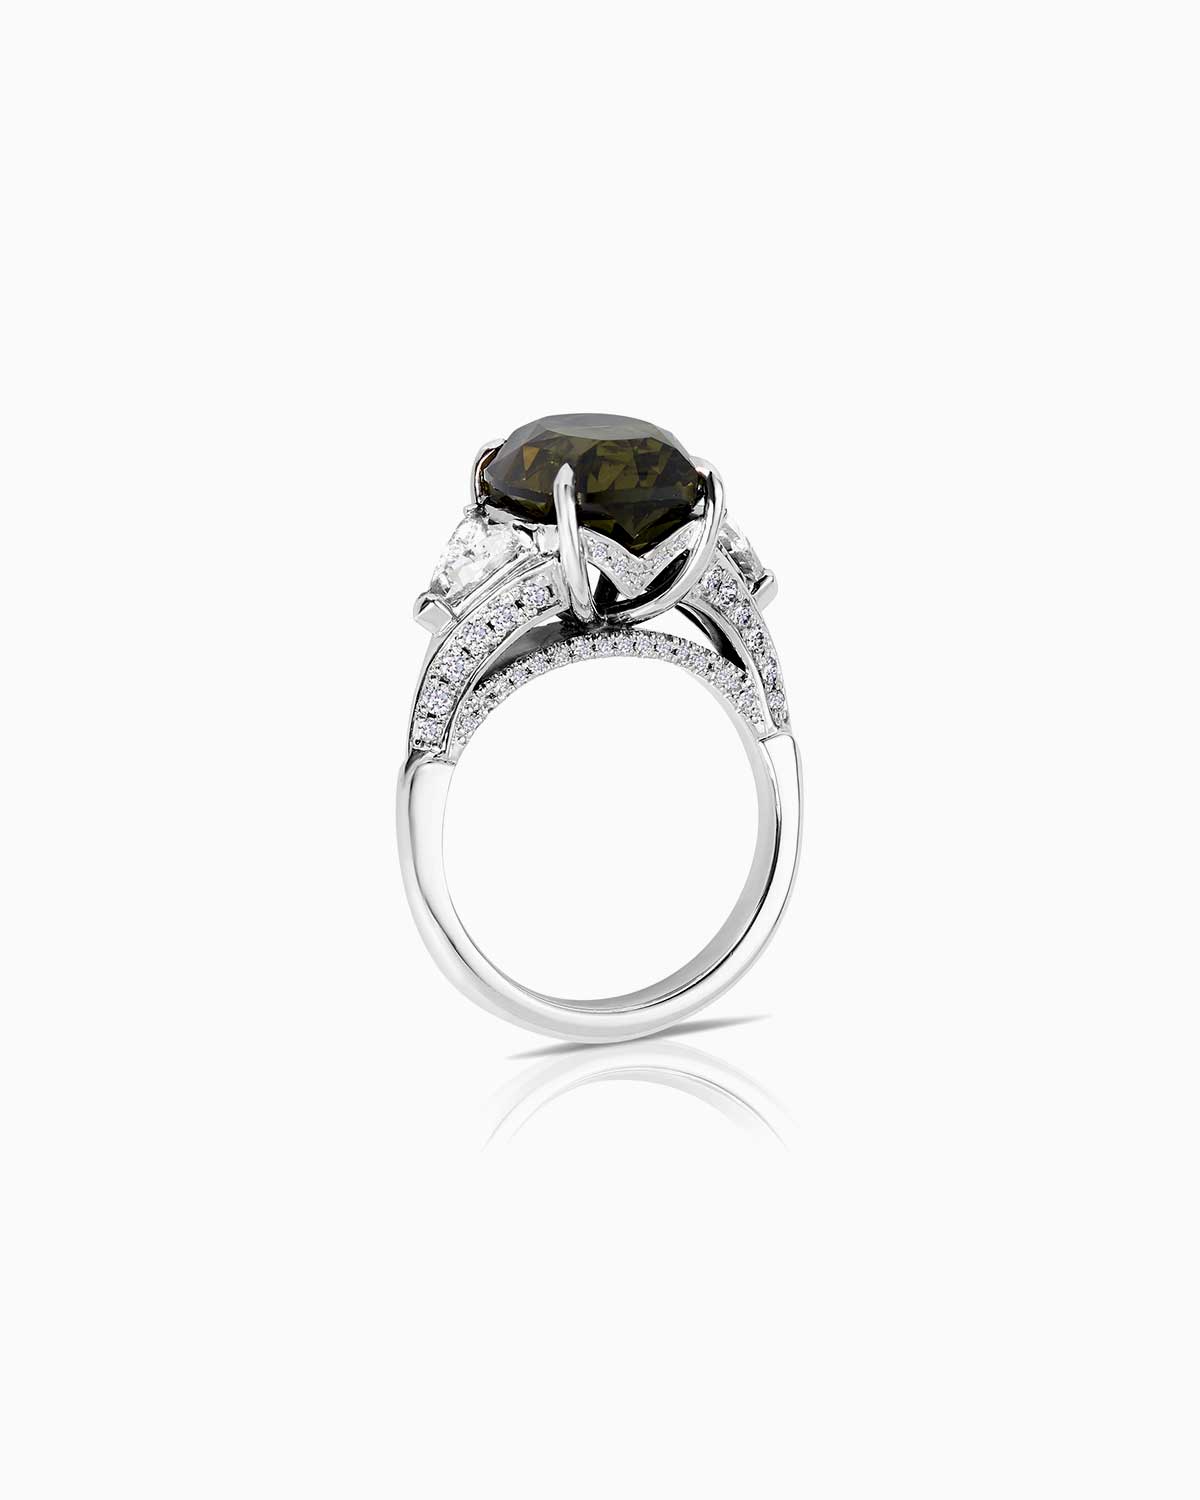 8.08ct Australian green sapphire trilogy featuring GIA certified triangle cut diamonds and set in 18 karat white gold by claude and me jewellery.